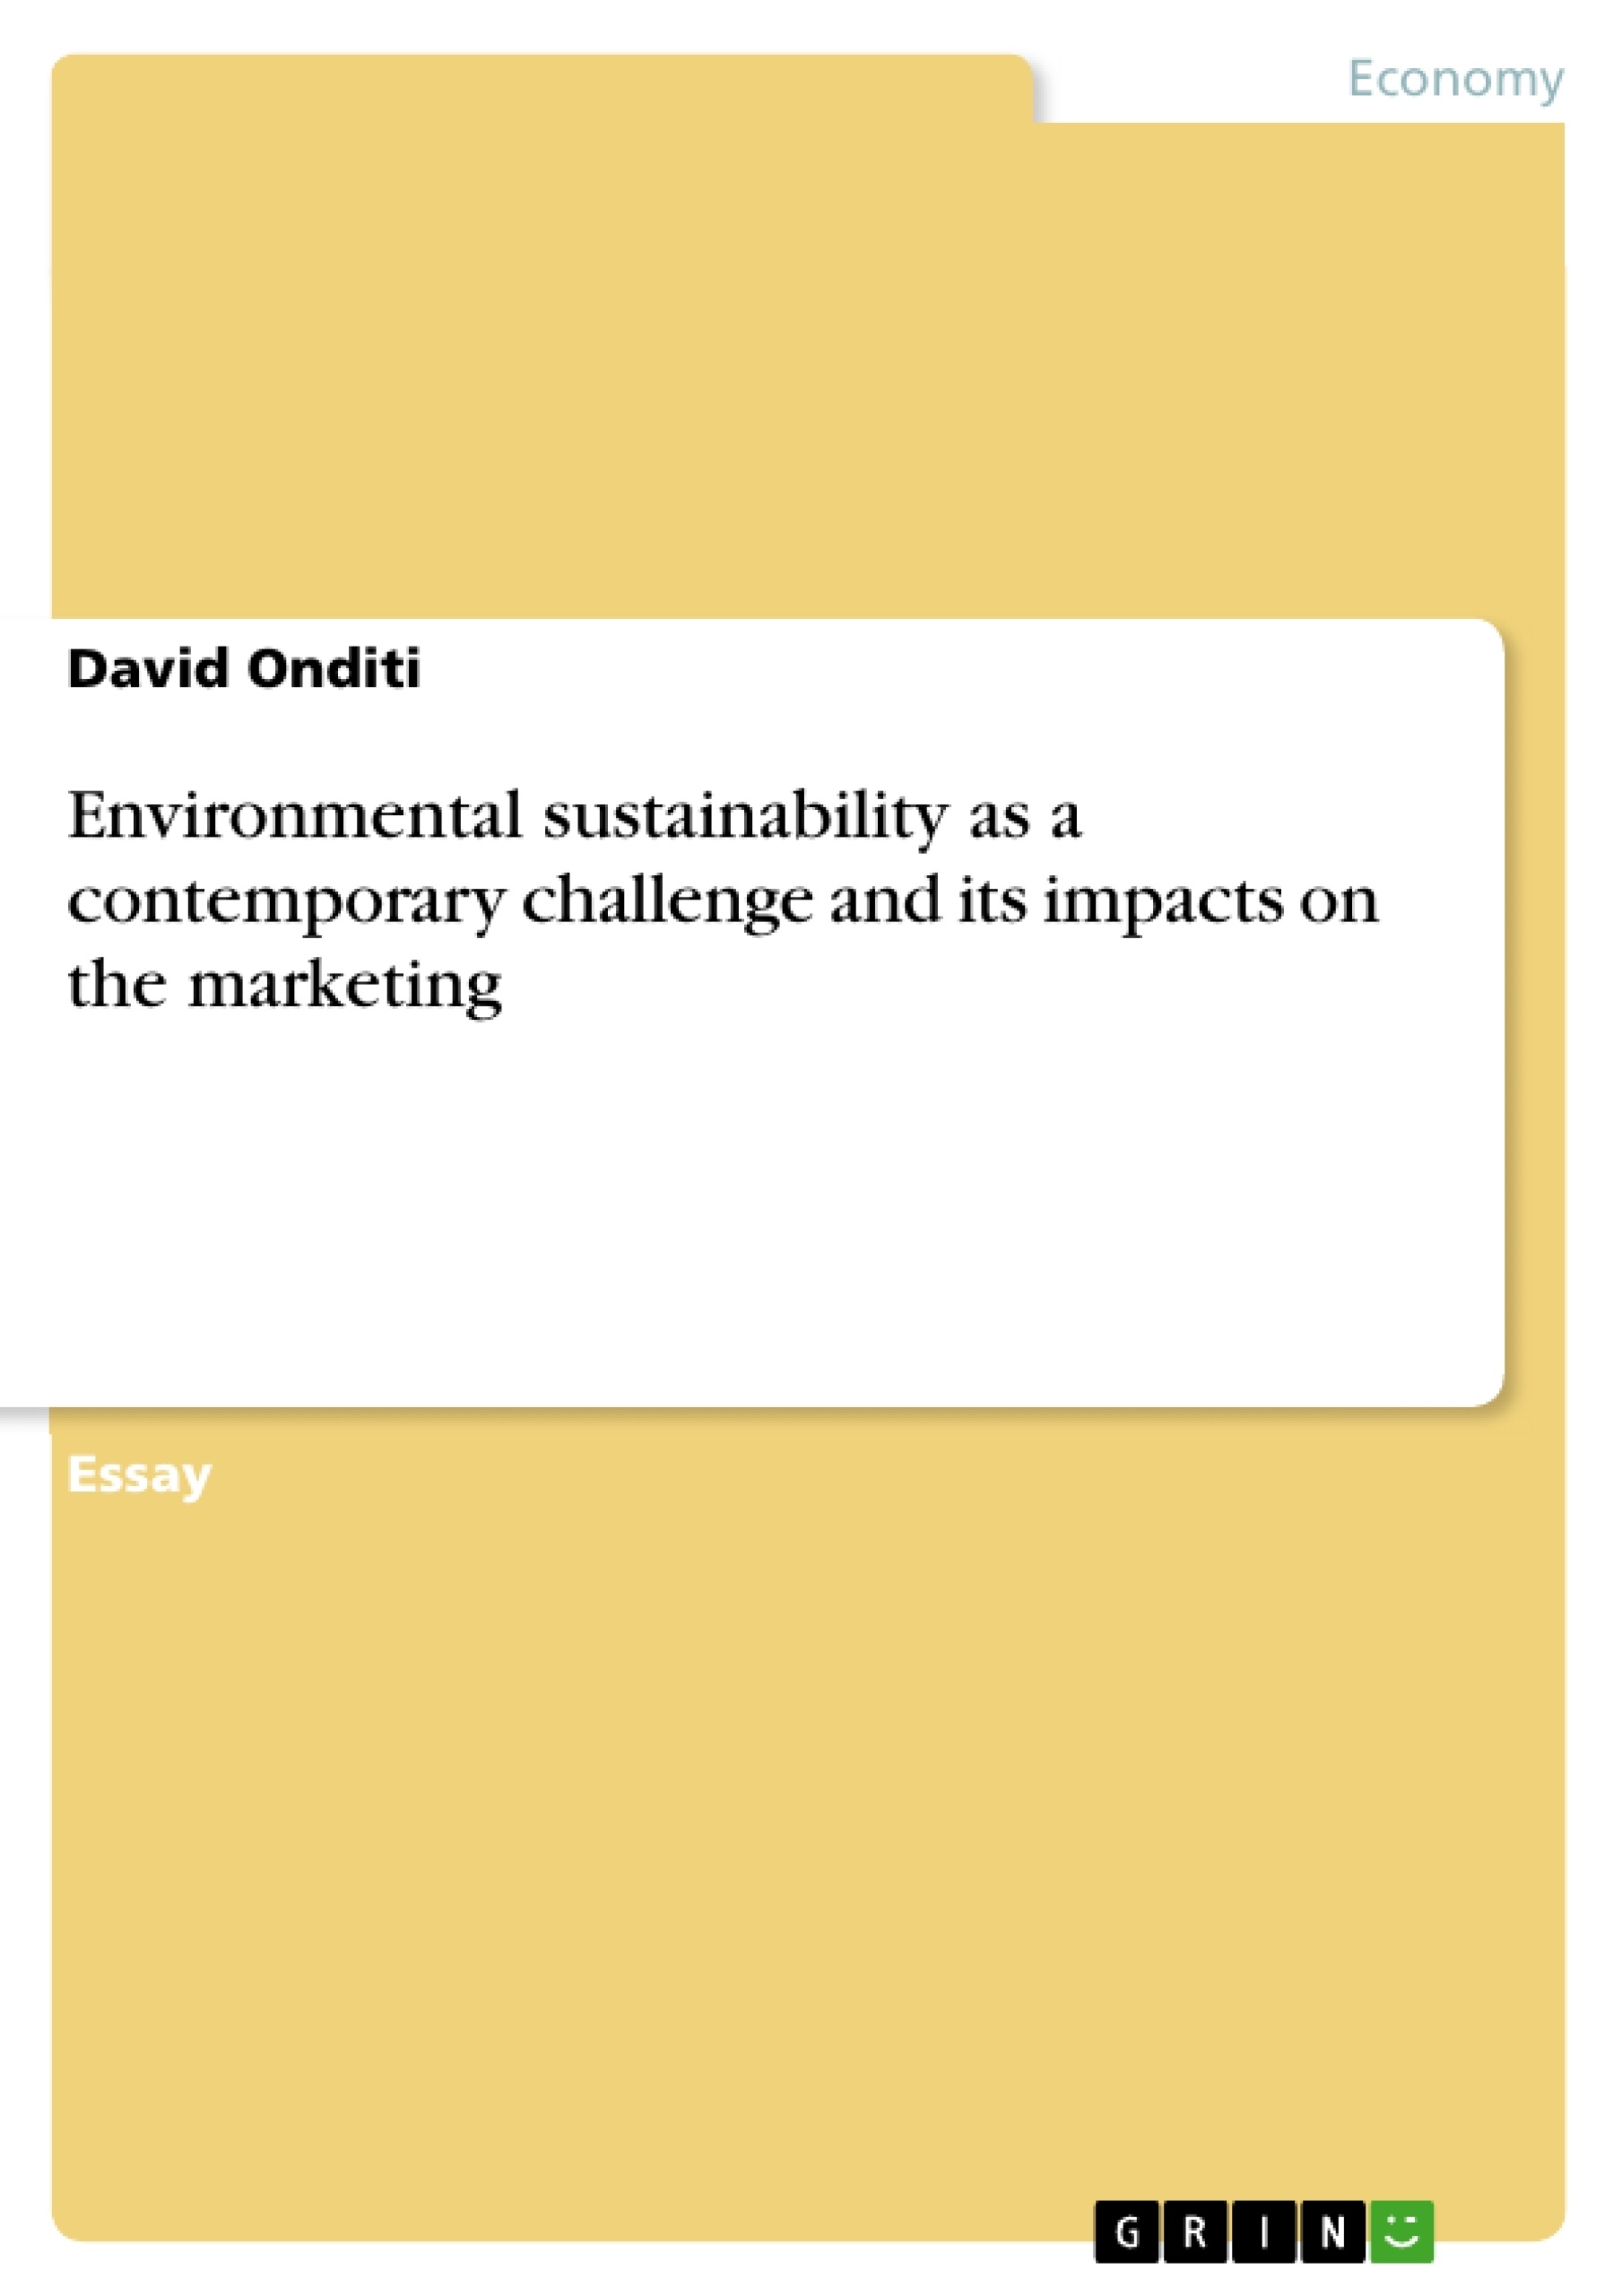 Título: Environmental sustainability as a contemporary challenge and its impacts on the marketing